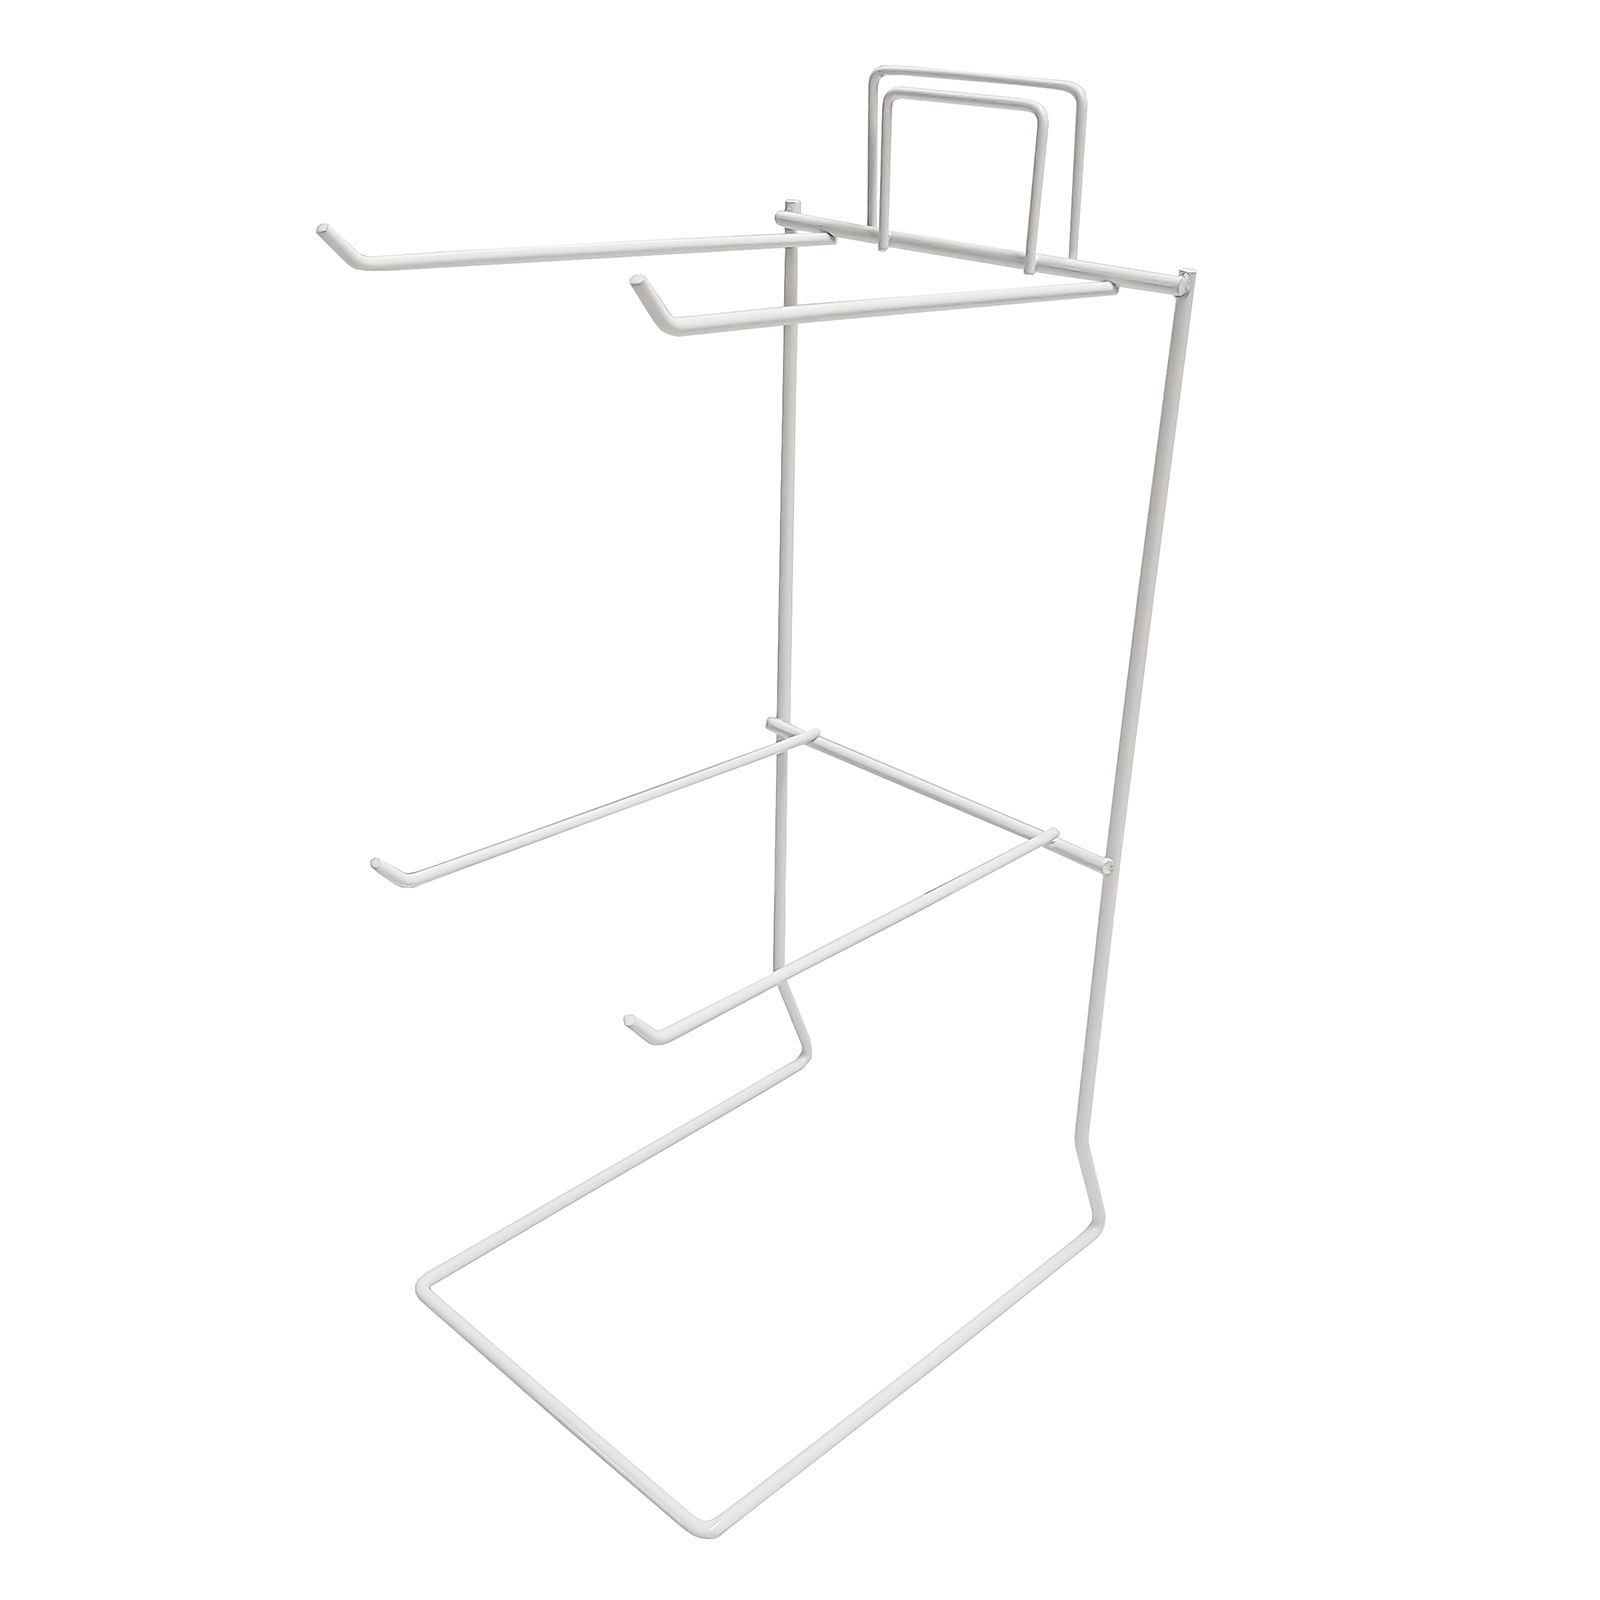 Counter Hook Stand - 4 Fixed Hooks - POS Shop Display with Header in White (J48) 